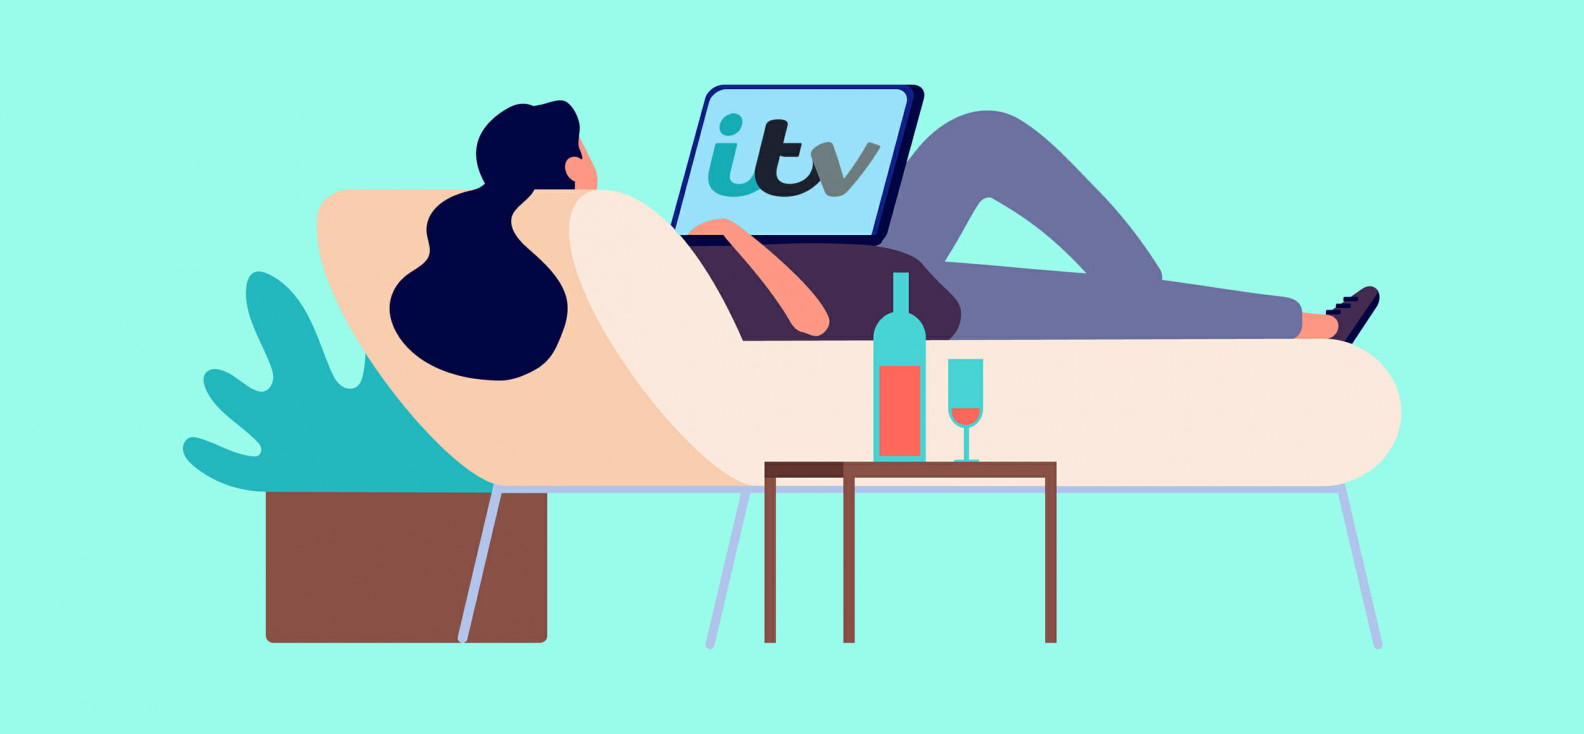 How to watch ITV HUB outside of the UK?